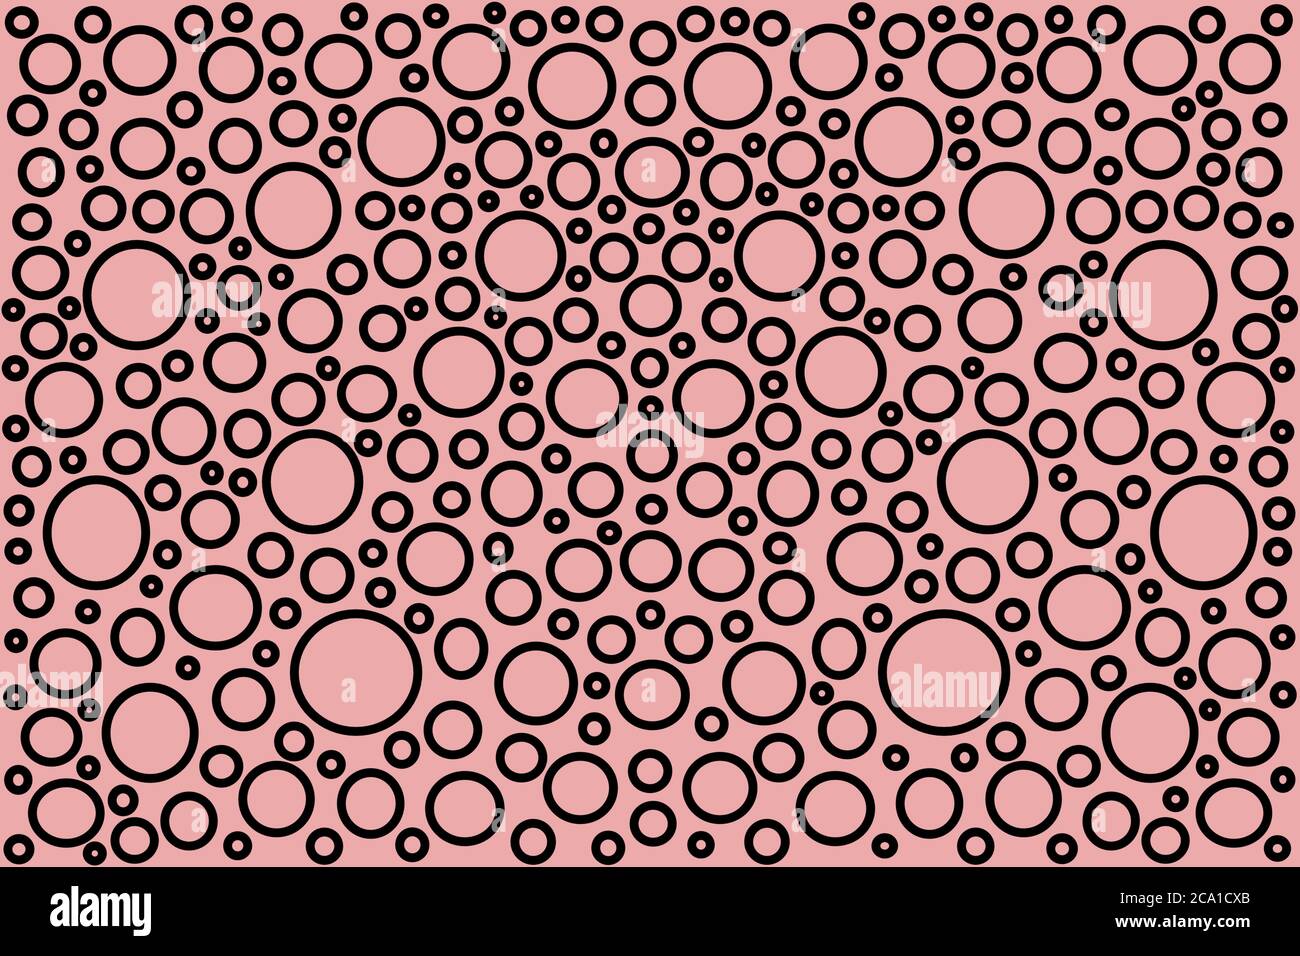 Black circles on pink background for packaging, fabric, wallpaper, textile material and print element, textile printing pattern Stock Photo